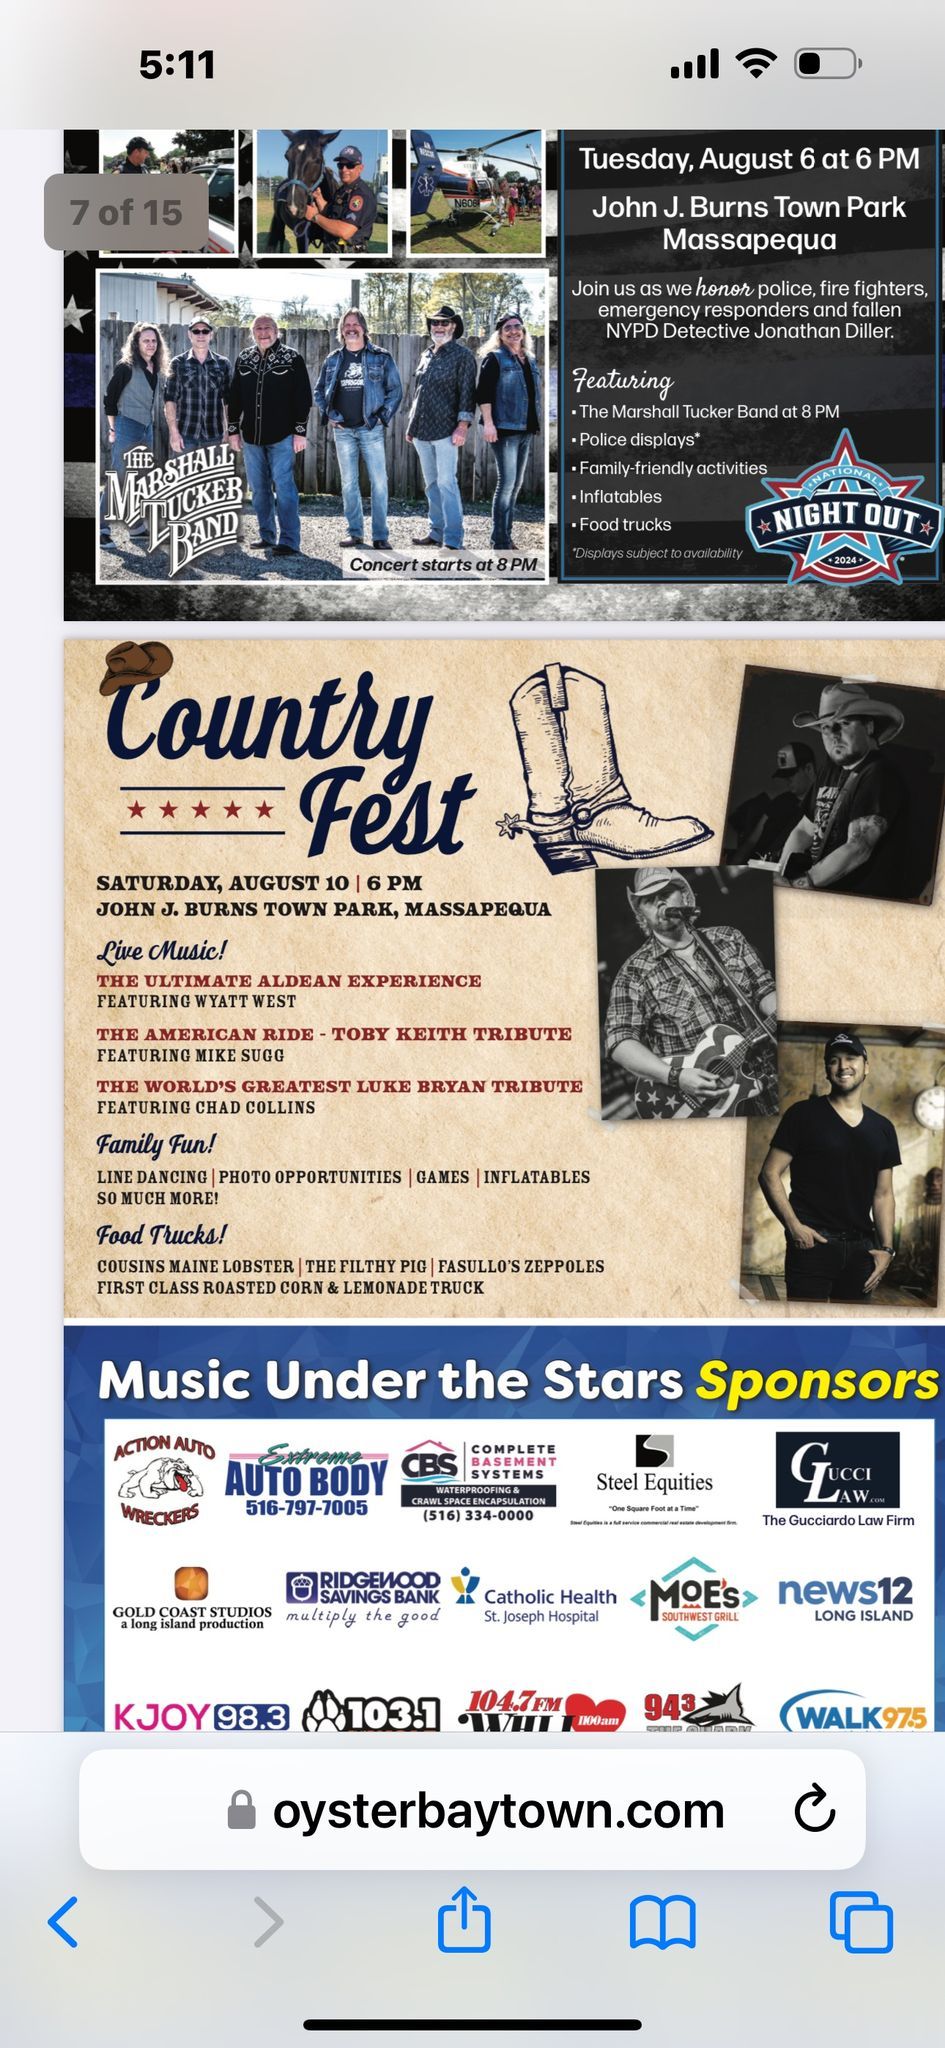 Country Fest cover bands: Jason Aldean, Toby Keith and Luke Bryan tribute bands 